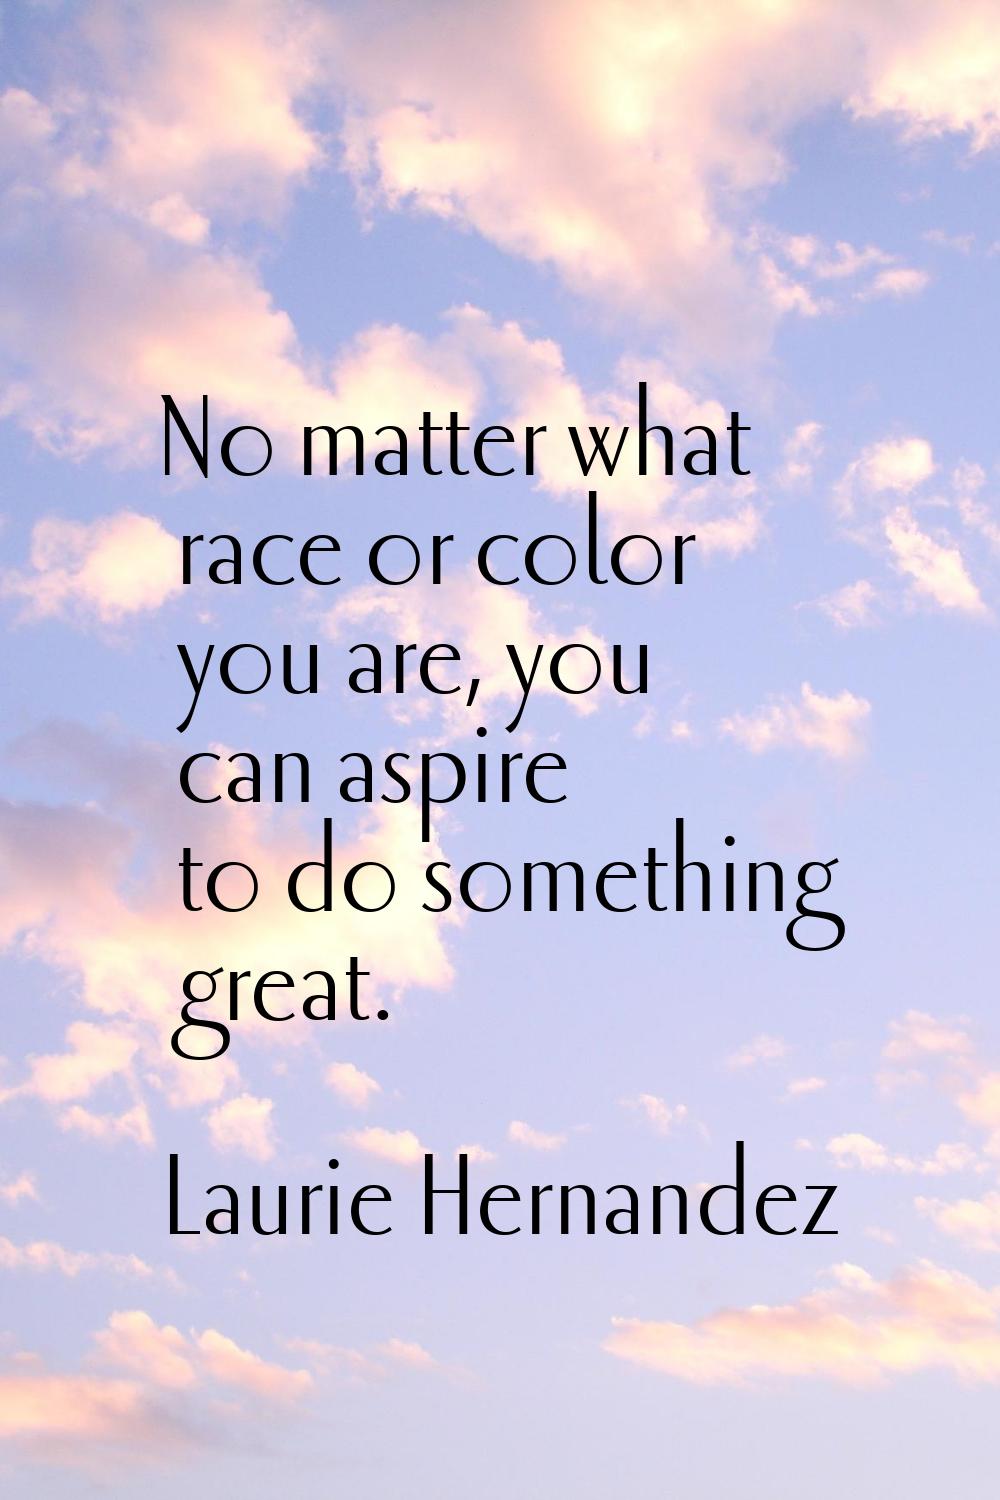 No matter what race or color you are, you can aspire to do something great.